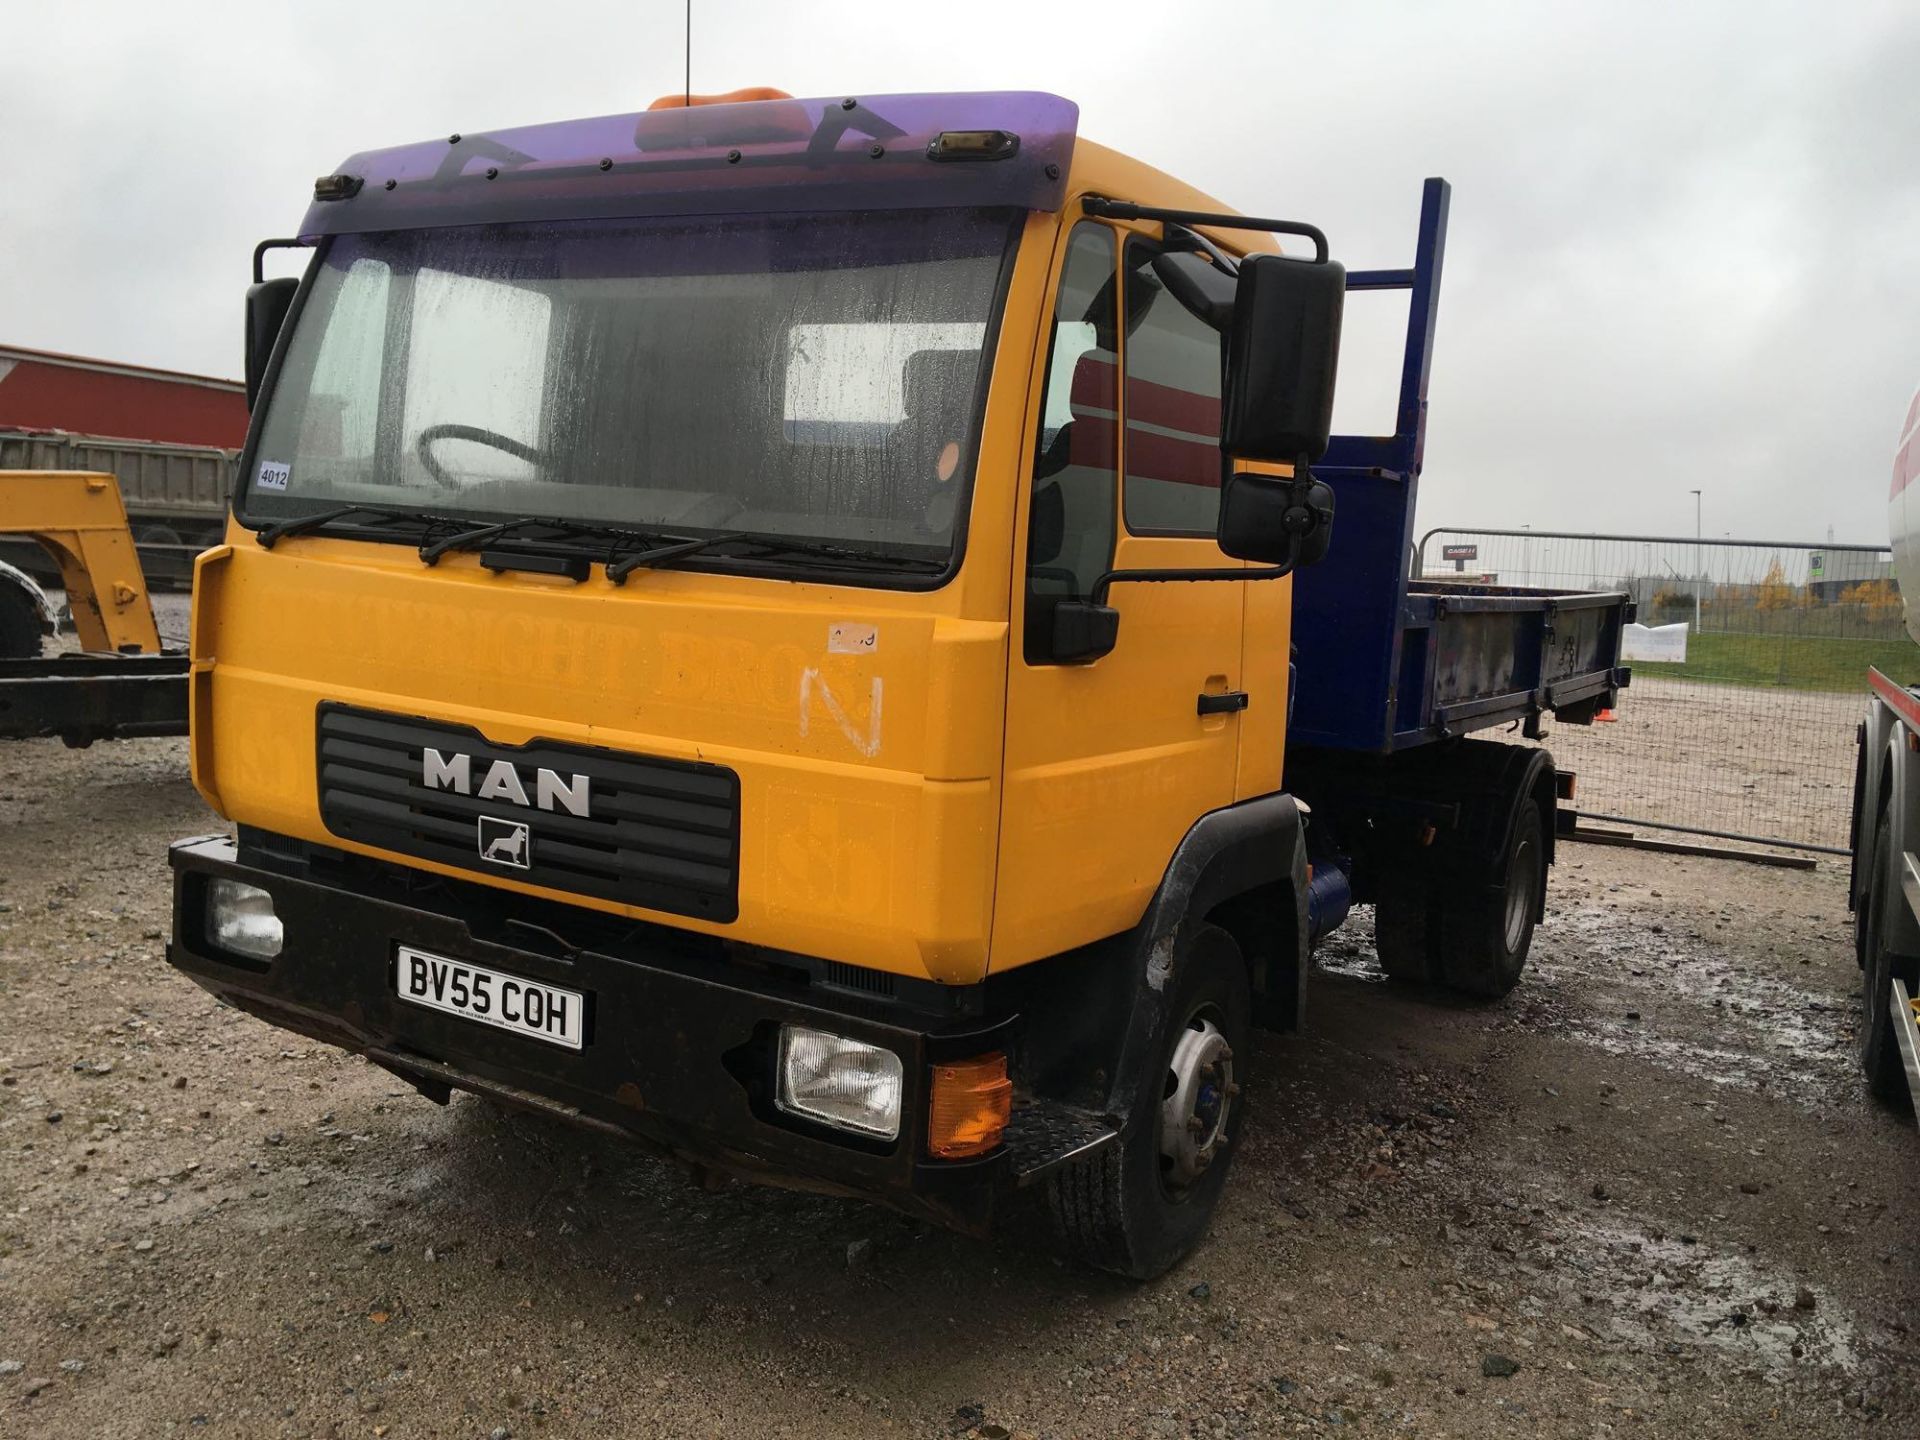 Man L 2000 8.155 Lrk Day - 4580cc Truck - Image 2 of 4